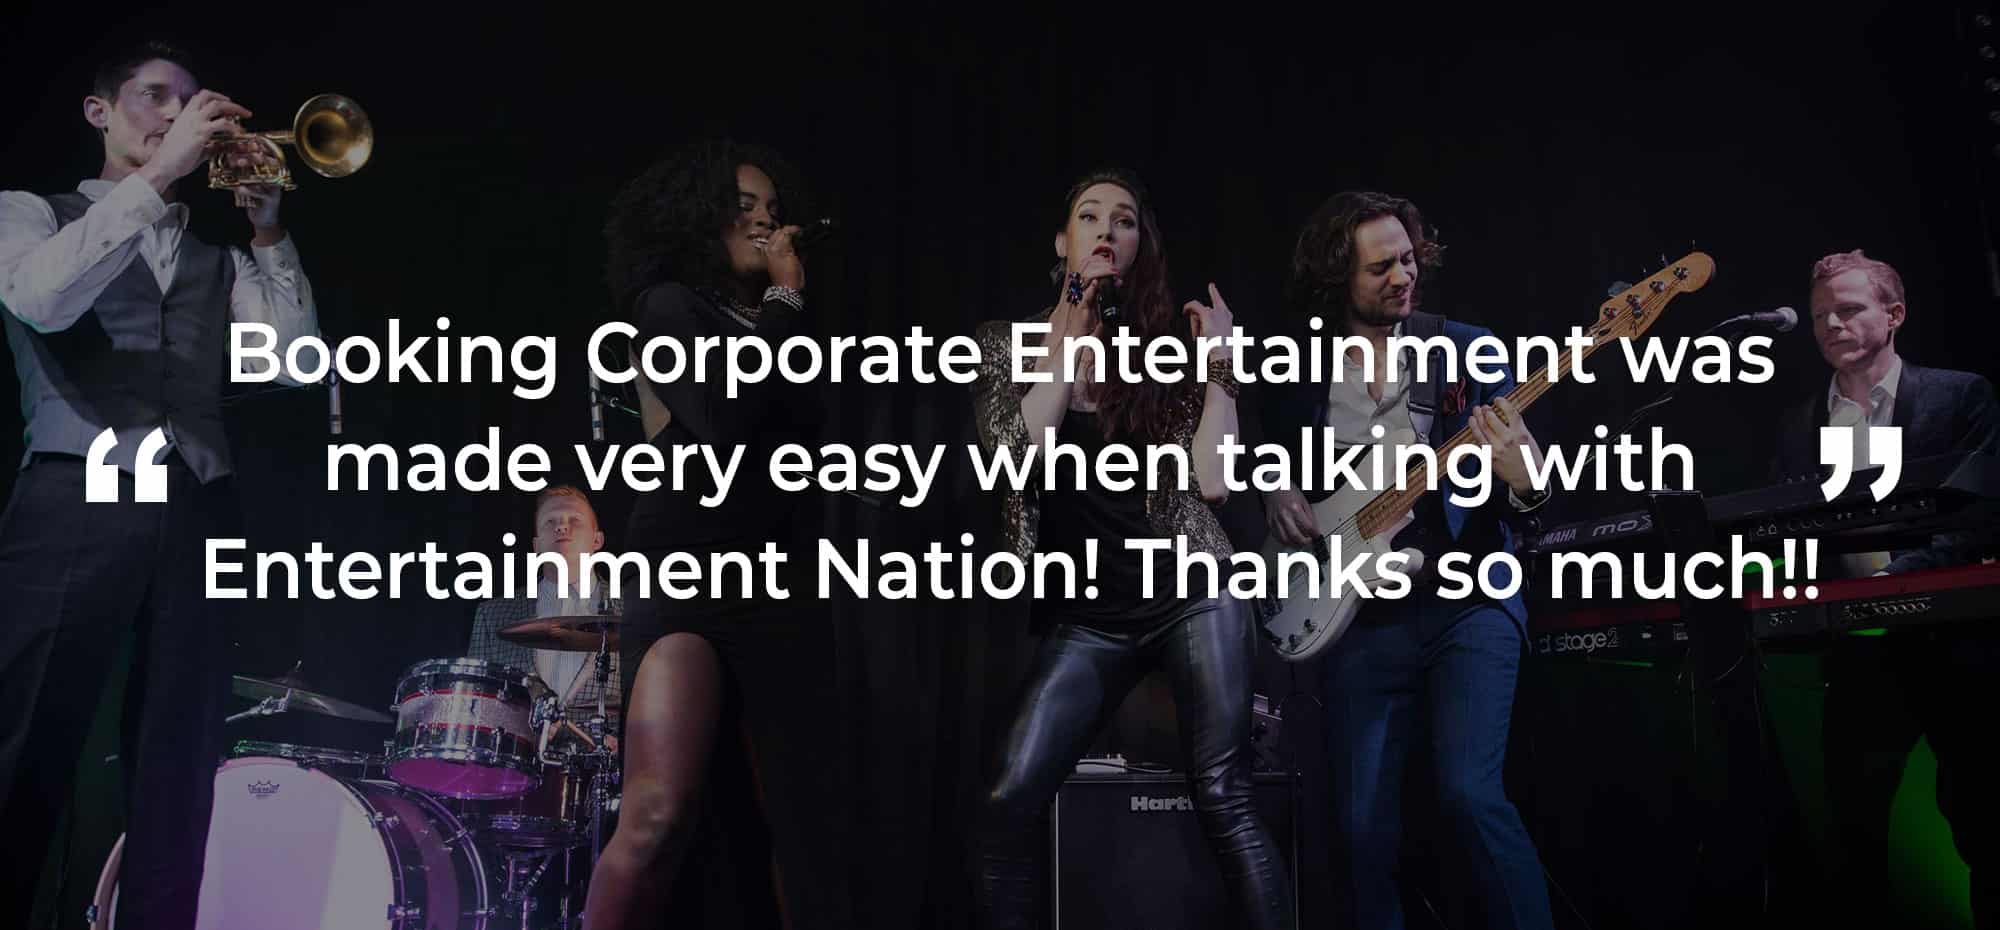 Review of Corporate Entertainment Chester